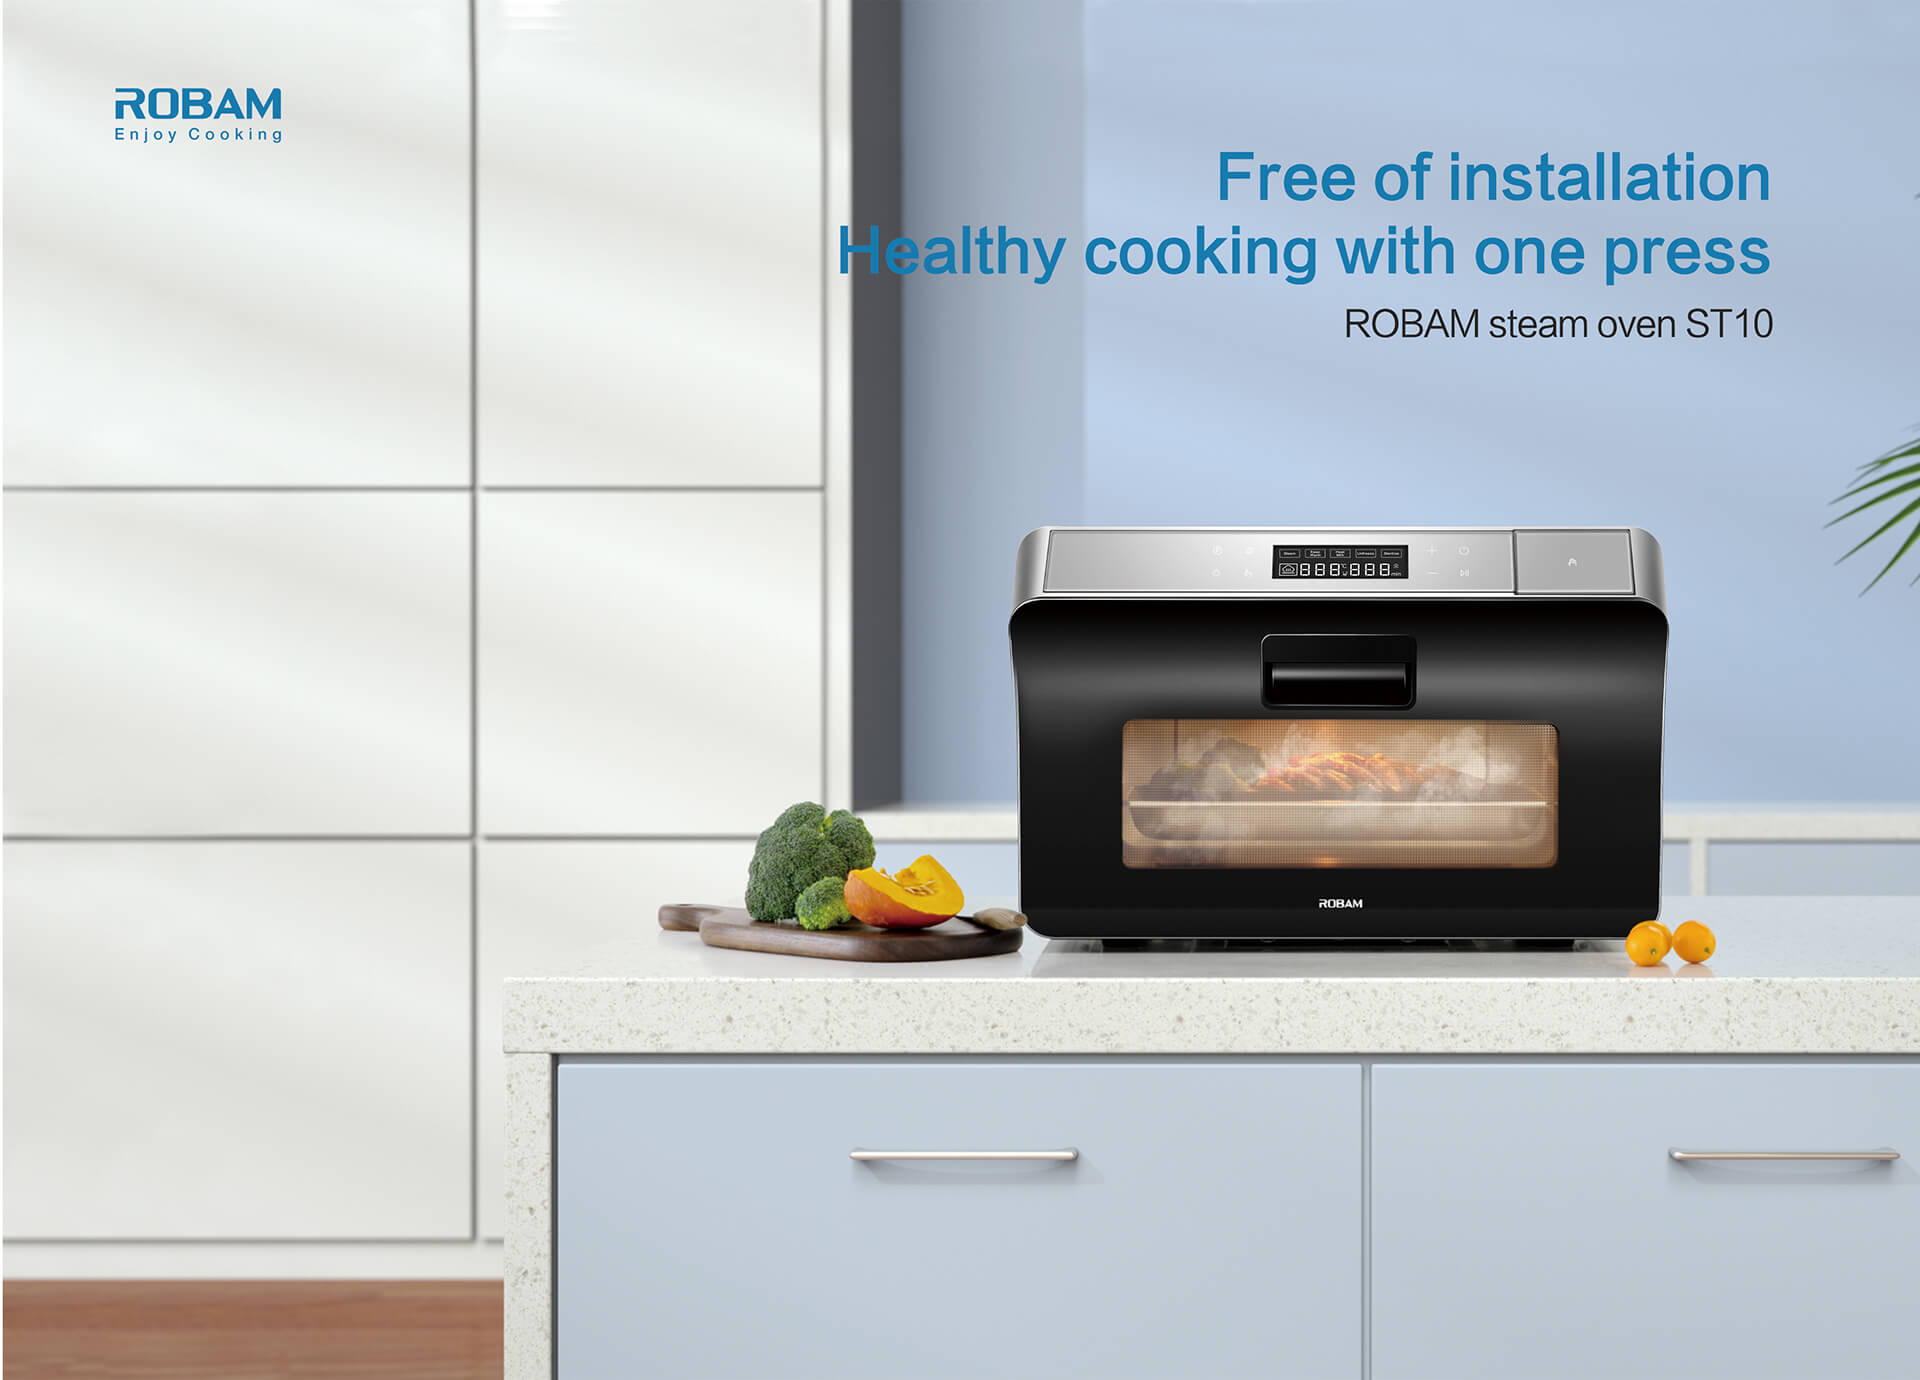 Free of Installation,space is not limited one button for healthy taste<br /><br />
ROBAM steam oven  ST10